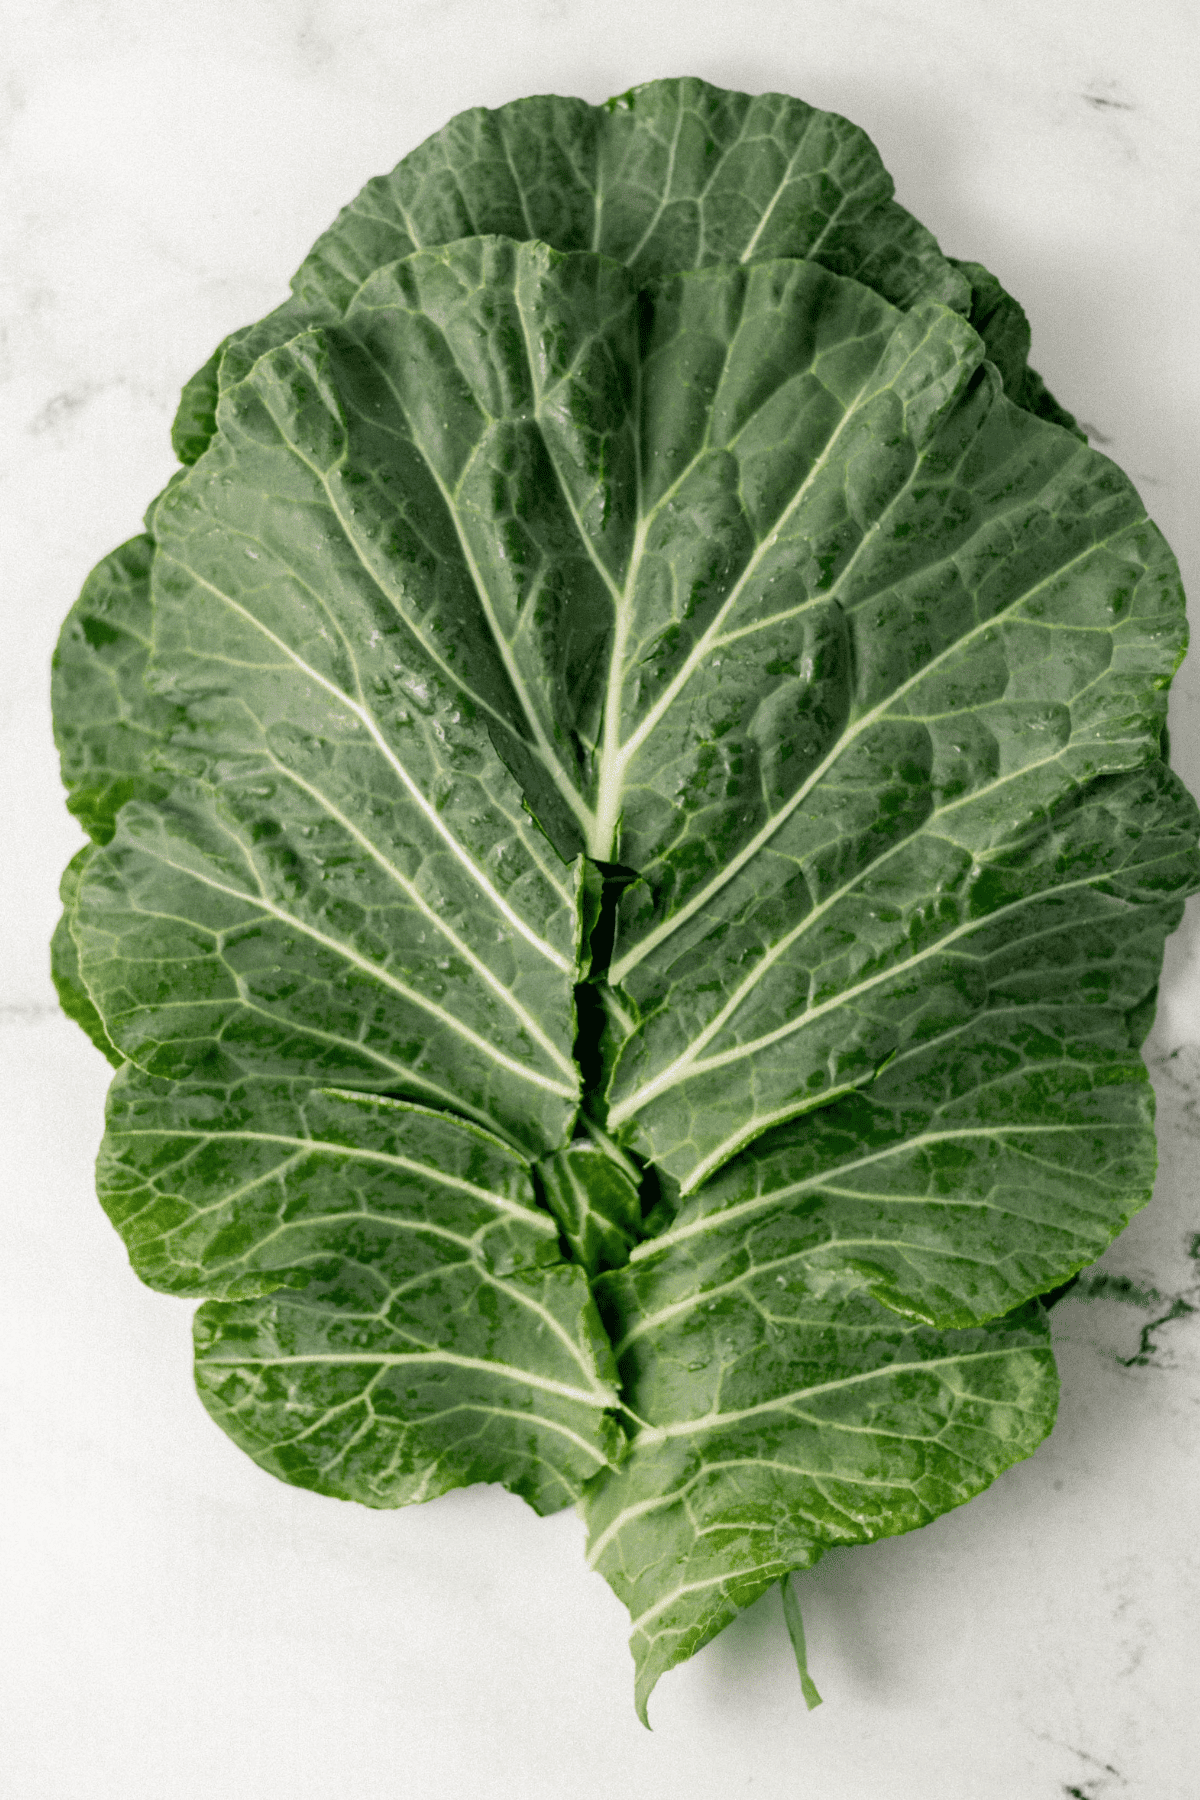 collard green leaf with stem fully removed and stacked with others